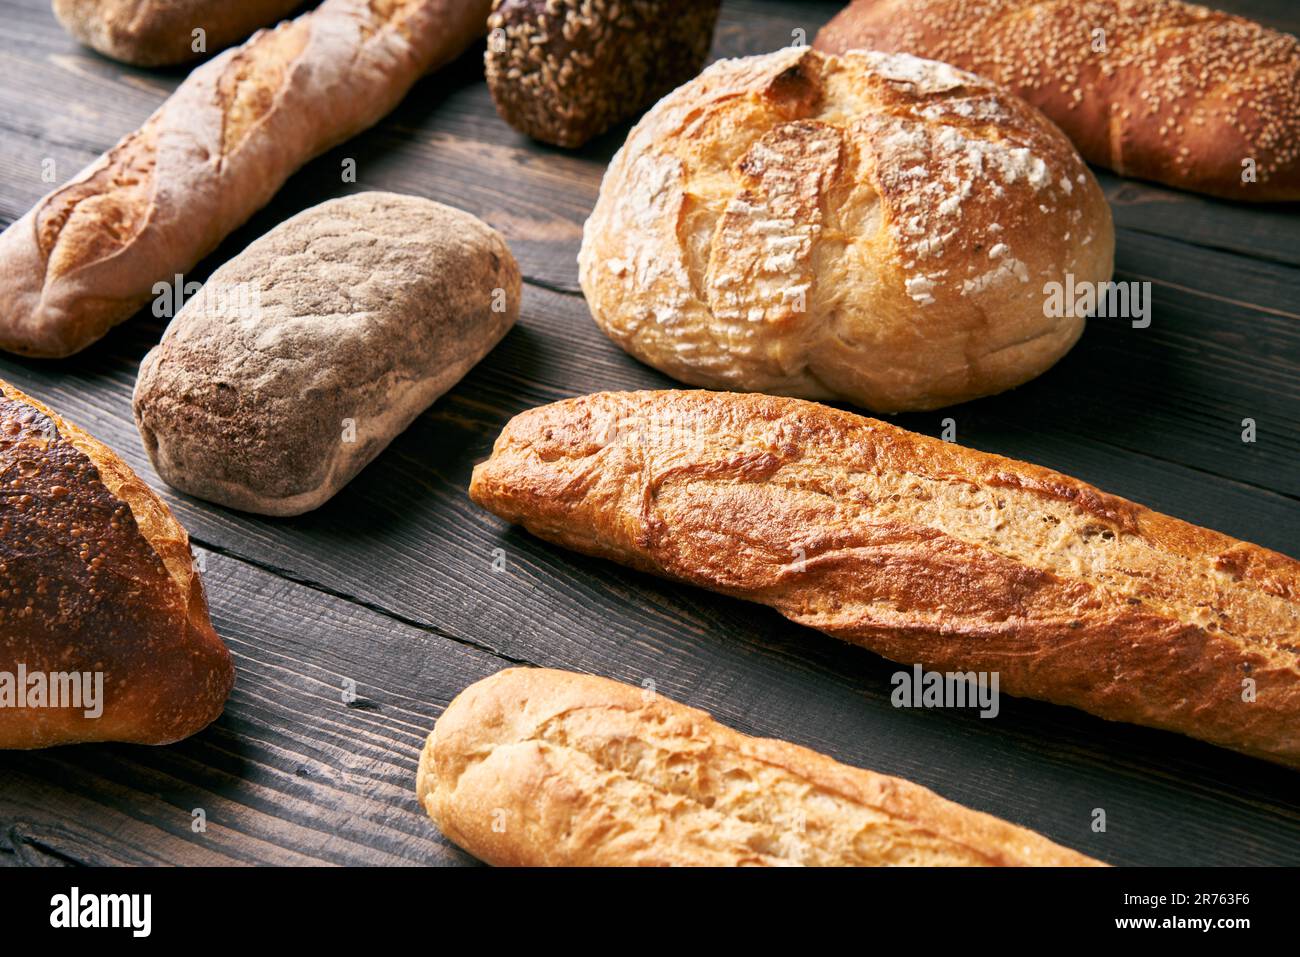 Different types of bread loaves on dark wooden background. Bakery, delicious food concept Stock Photo